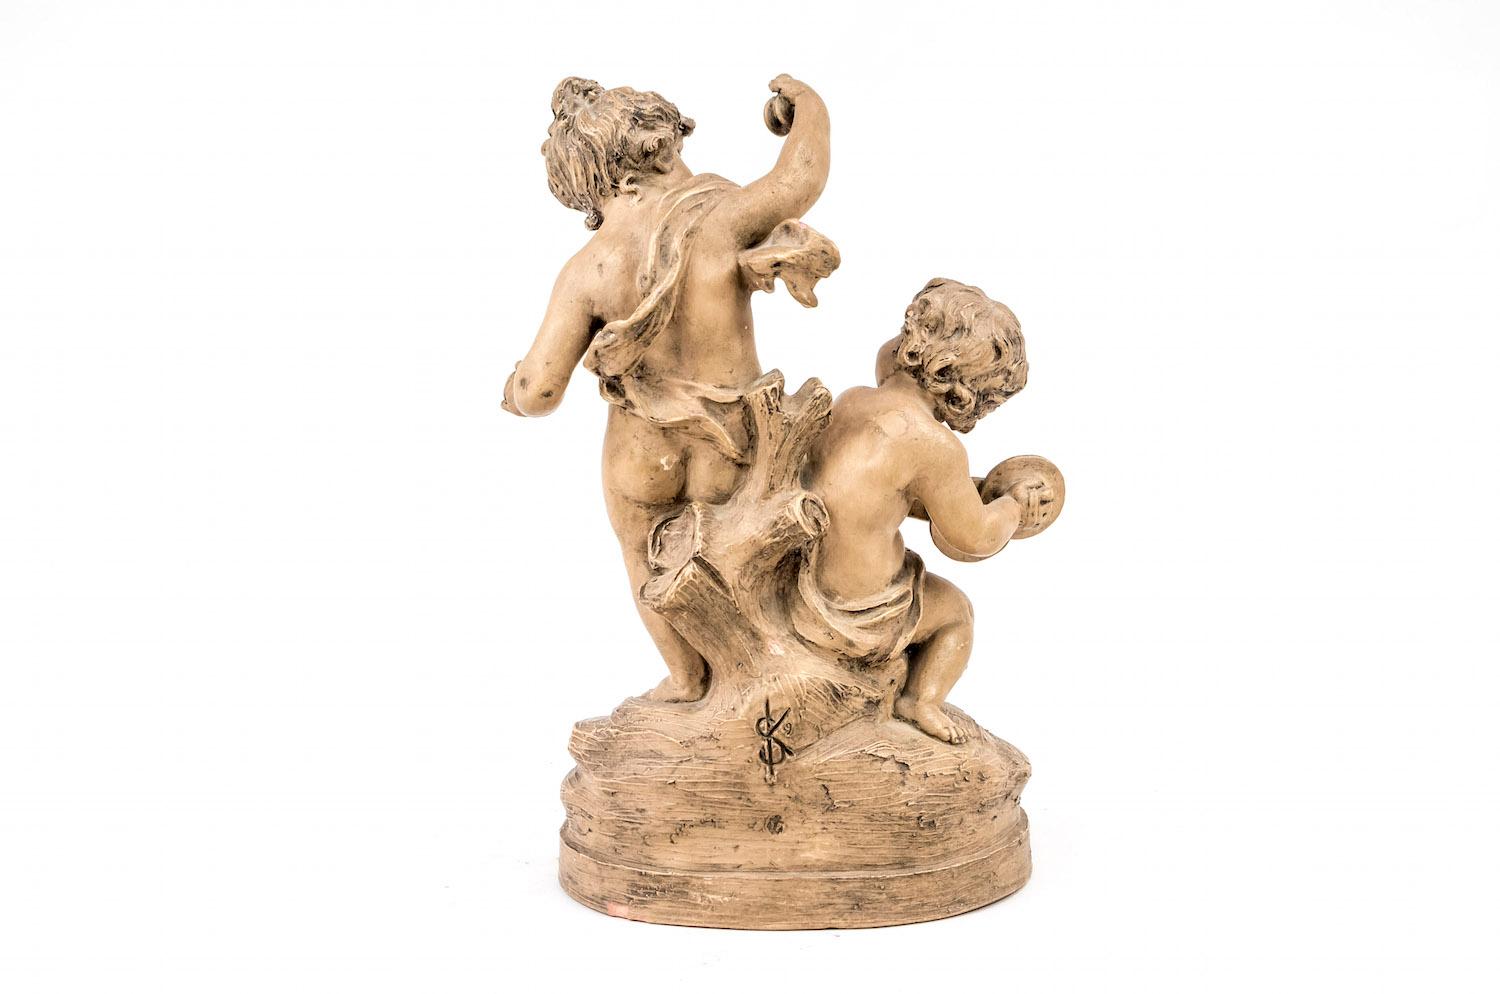 Sylvain Kinsburger, signed.
Terracotta sculpture figuring musician children in the 18th century style.
The stand child wears a simple cloth around his body and plays castanets. The sat child also wears a simple cloth and plays cymbals. They are